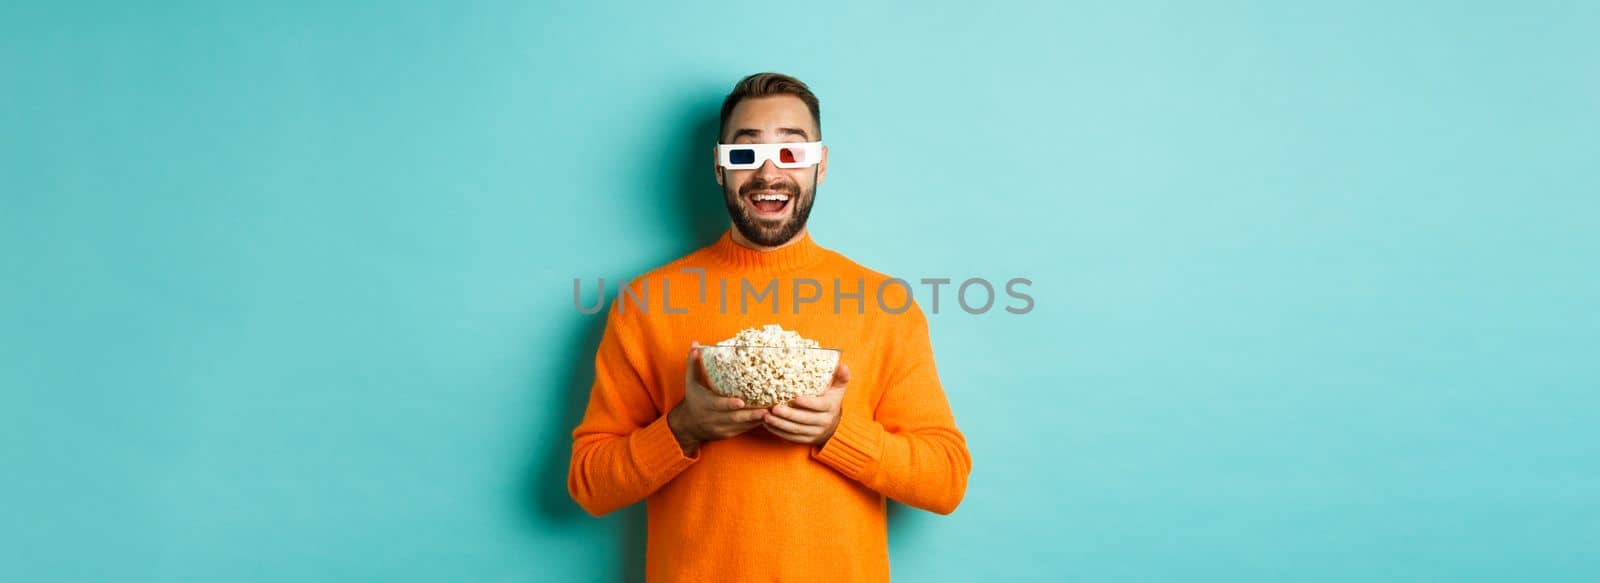 Happy guy watching movies in 3d glasses, eating popcorn and looking at camera, standing over light blue background. Copy space